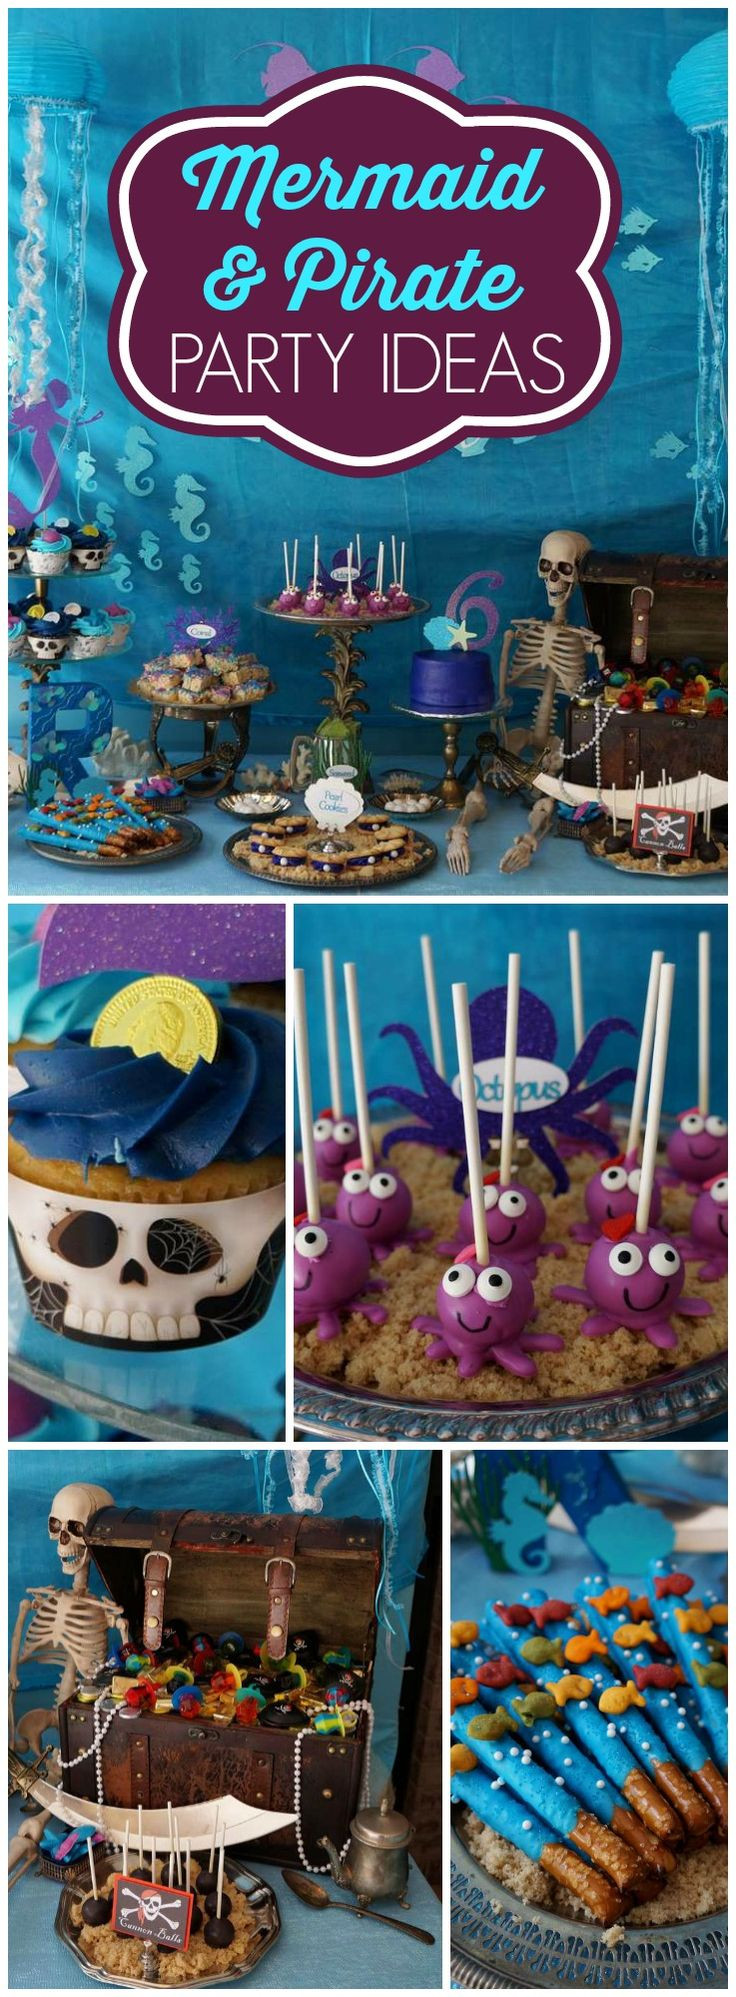 Mermaid Pirate Party Ideas
 Pirates and Mermaids Birthday "Remi s Pirates and